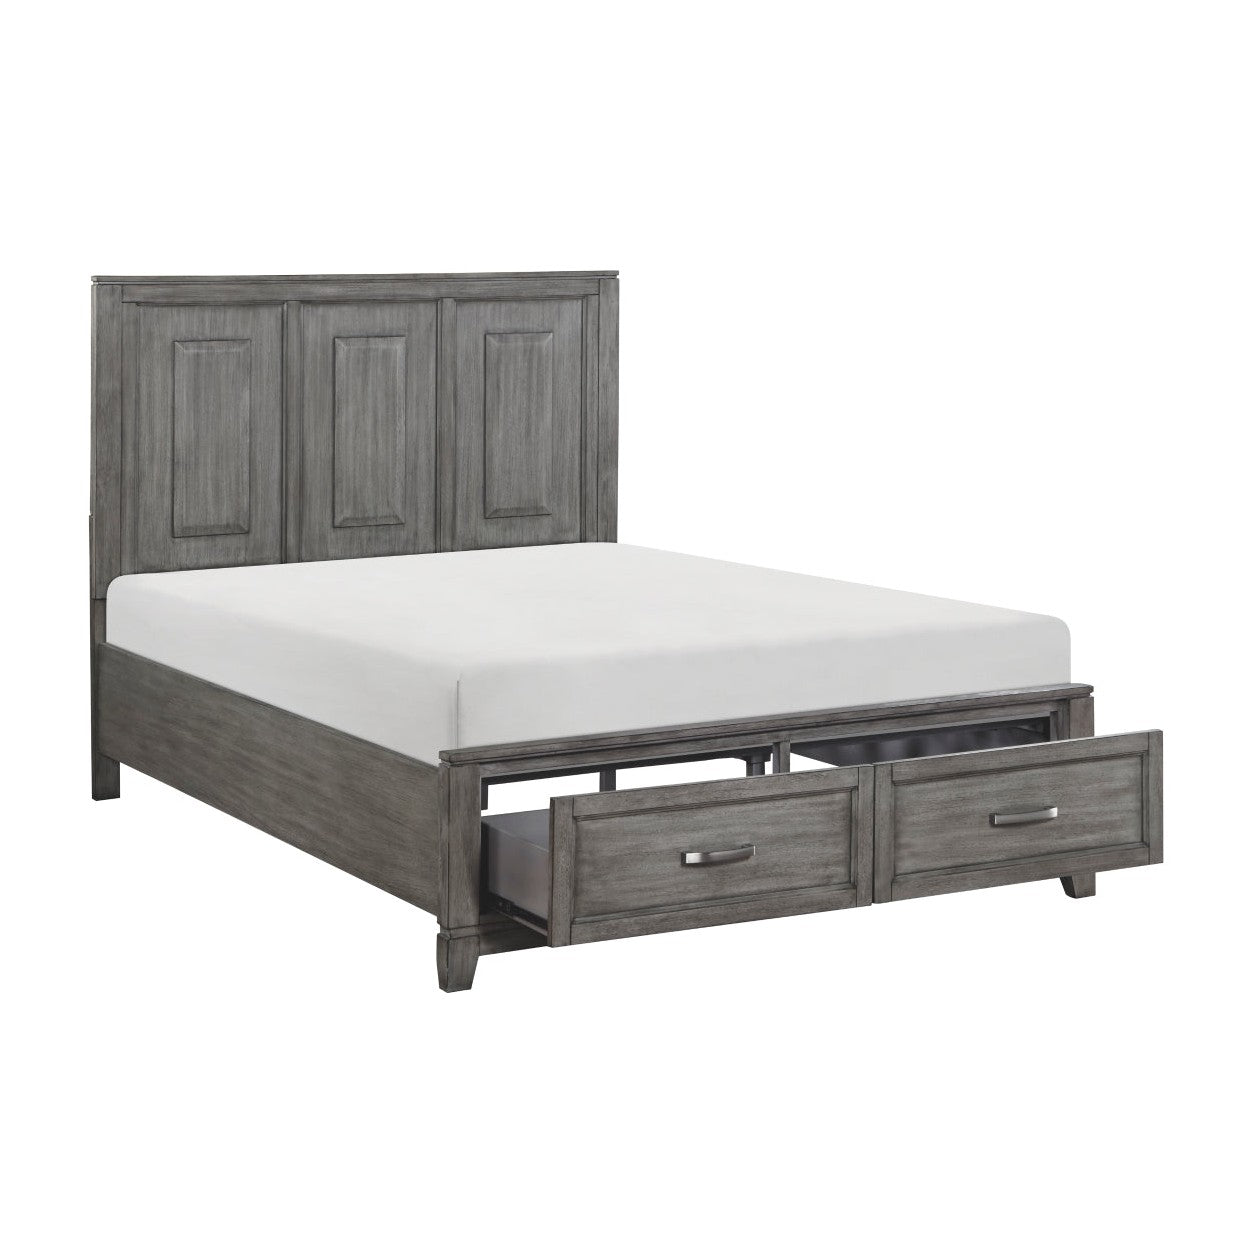 (3) QUEEN PLFM BED W/FB DRAWERS 1450-1*